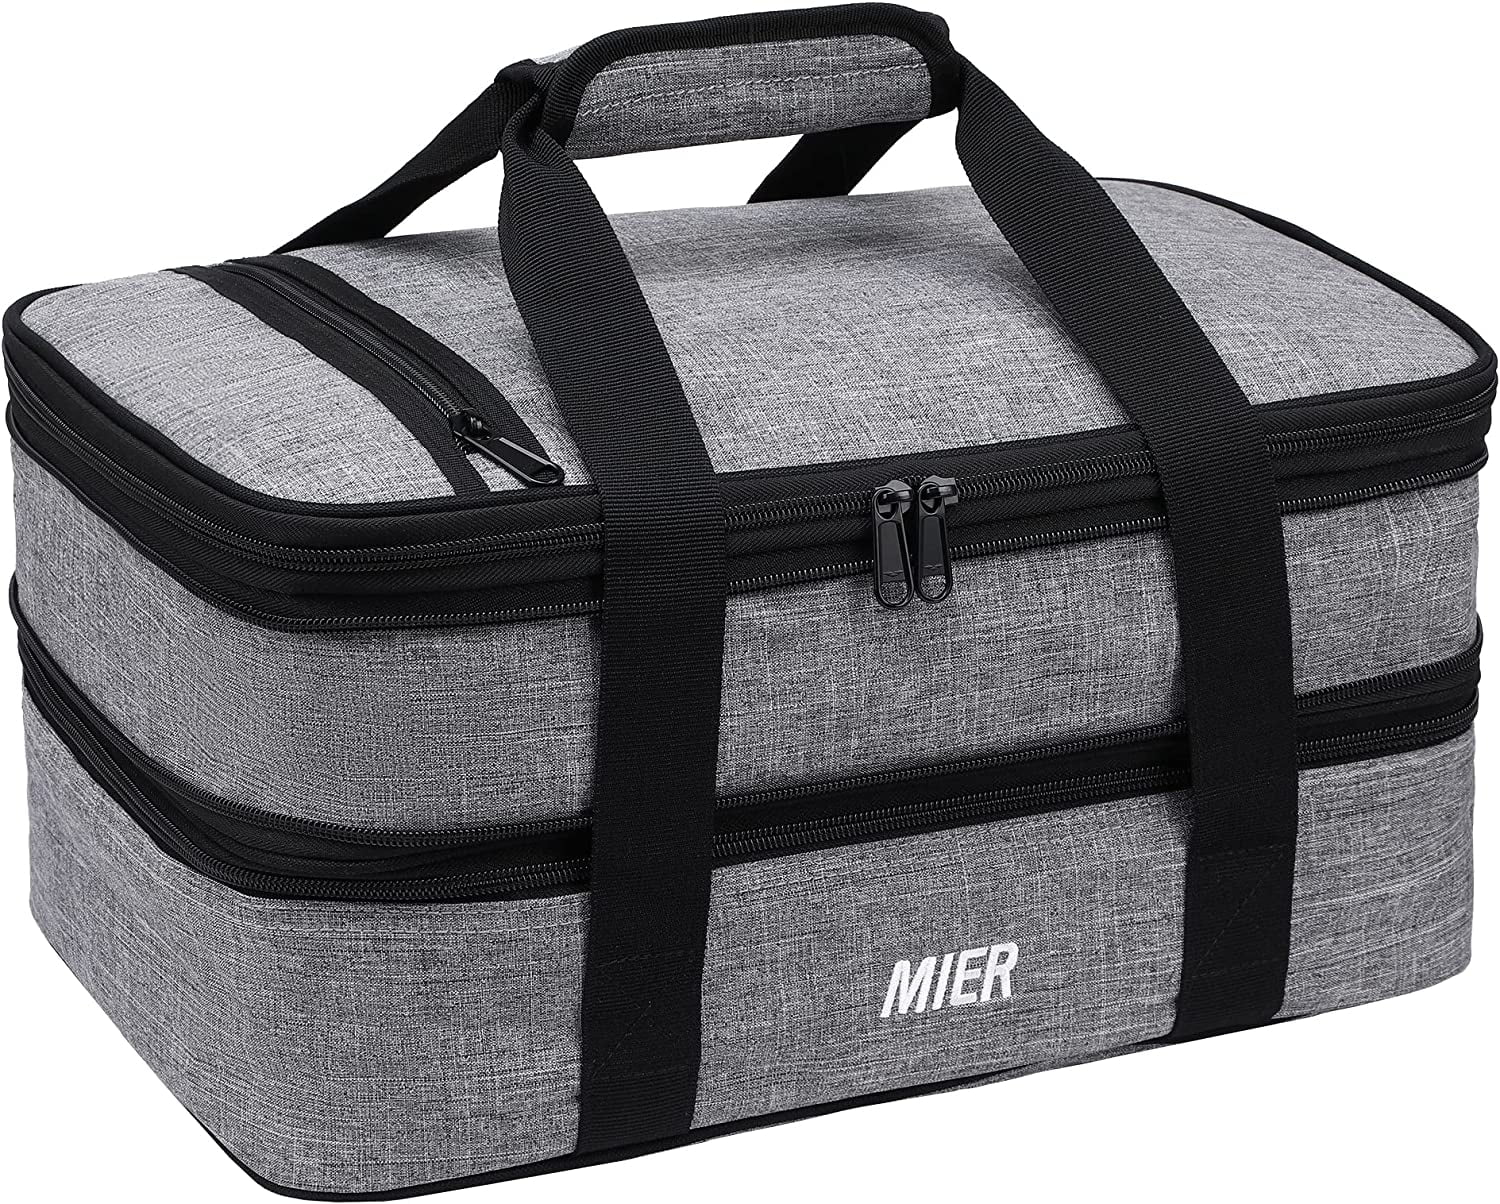 MIER Stylish Lunch Bag for Women Insulated Lunch Box Totes, Grey